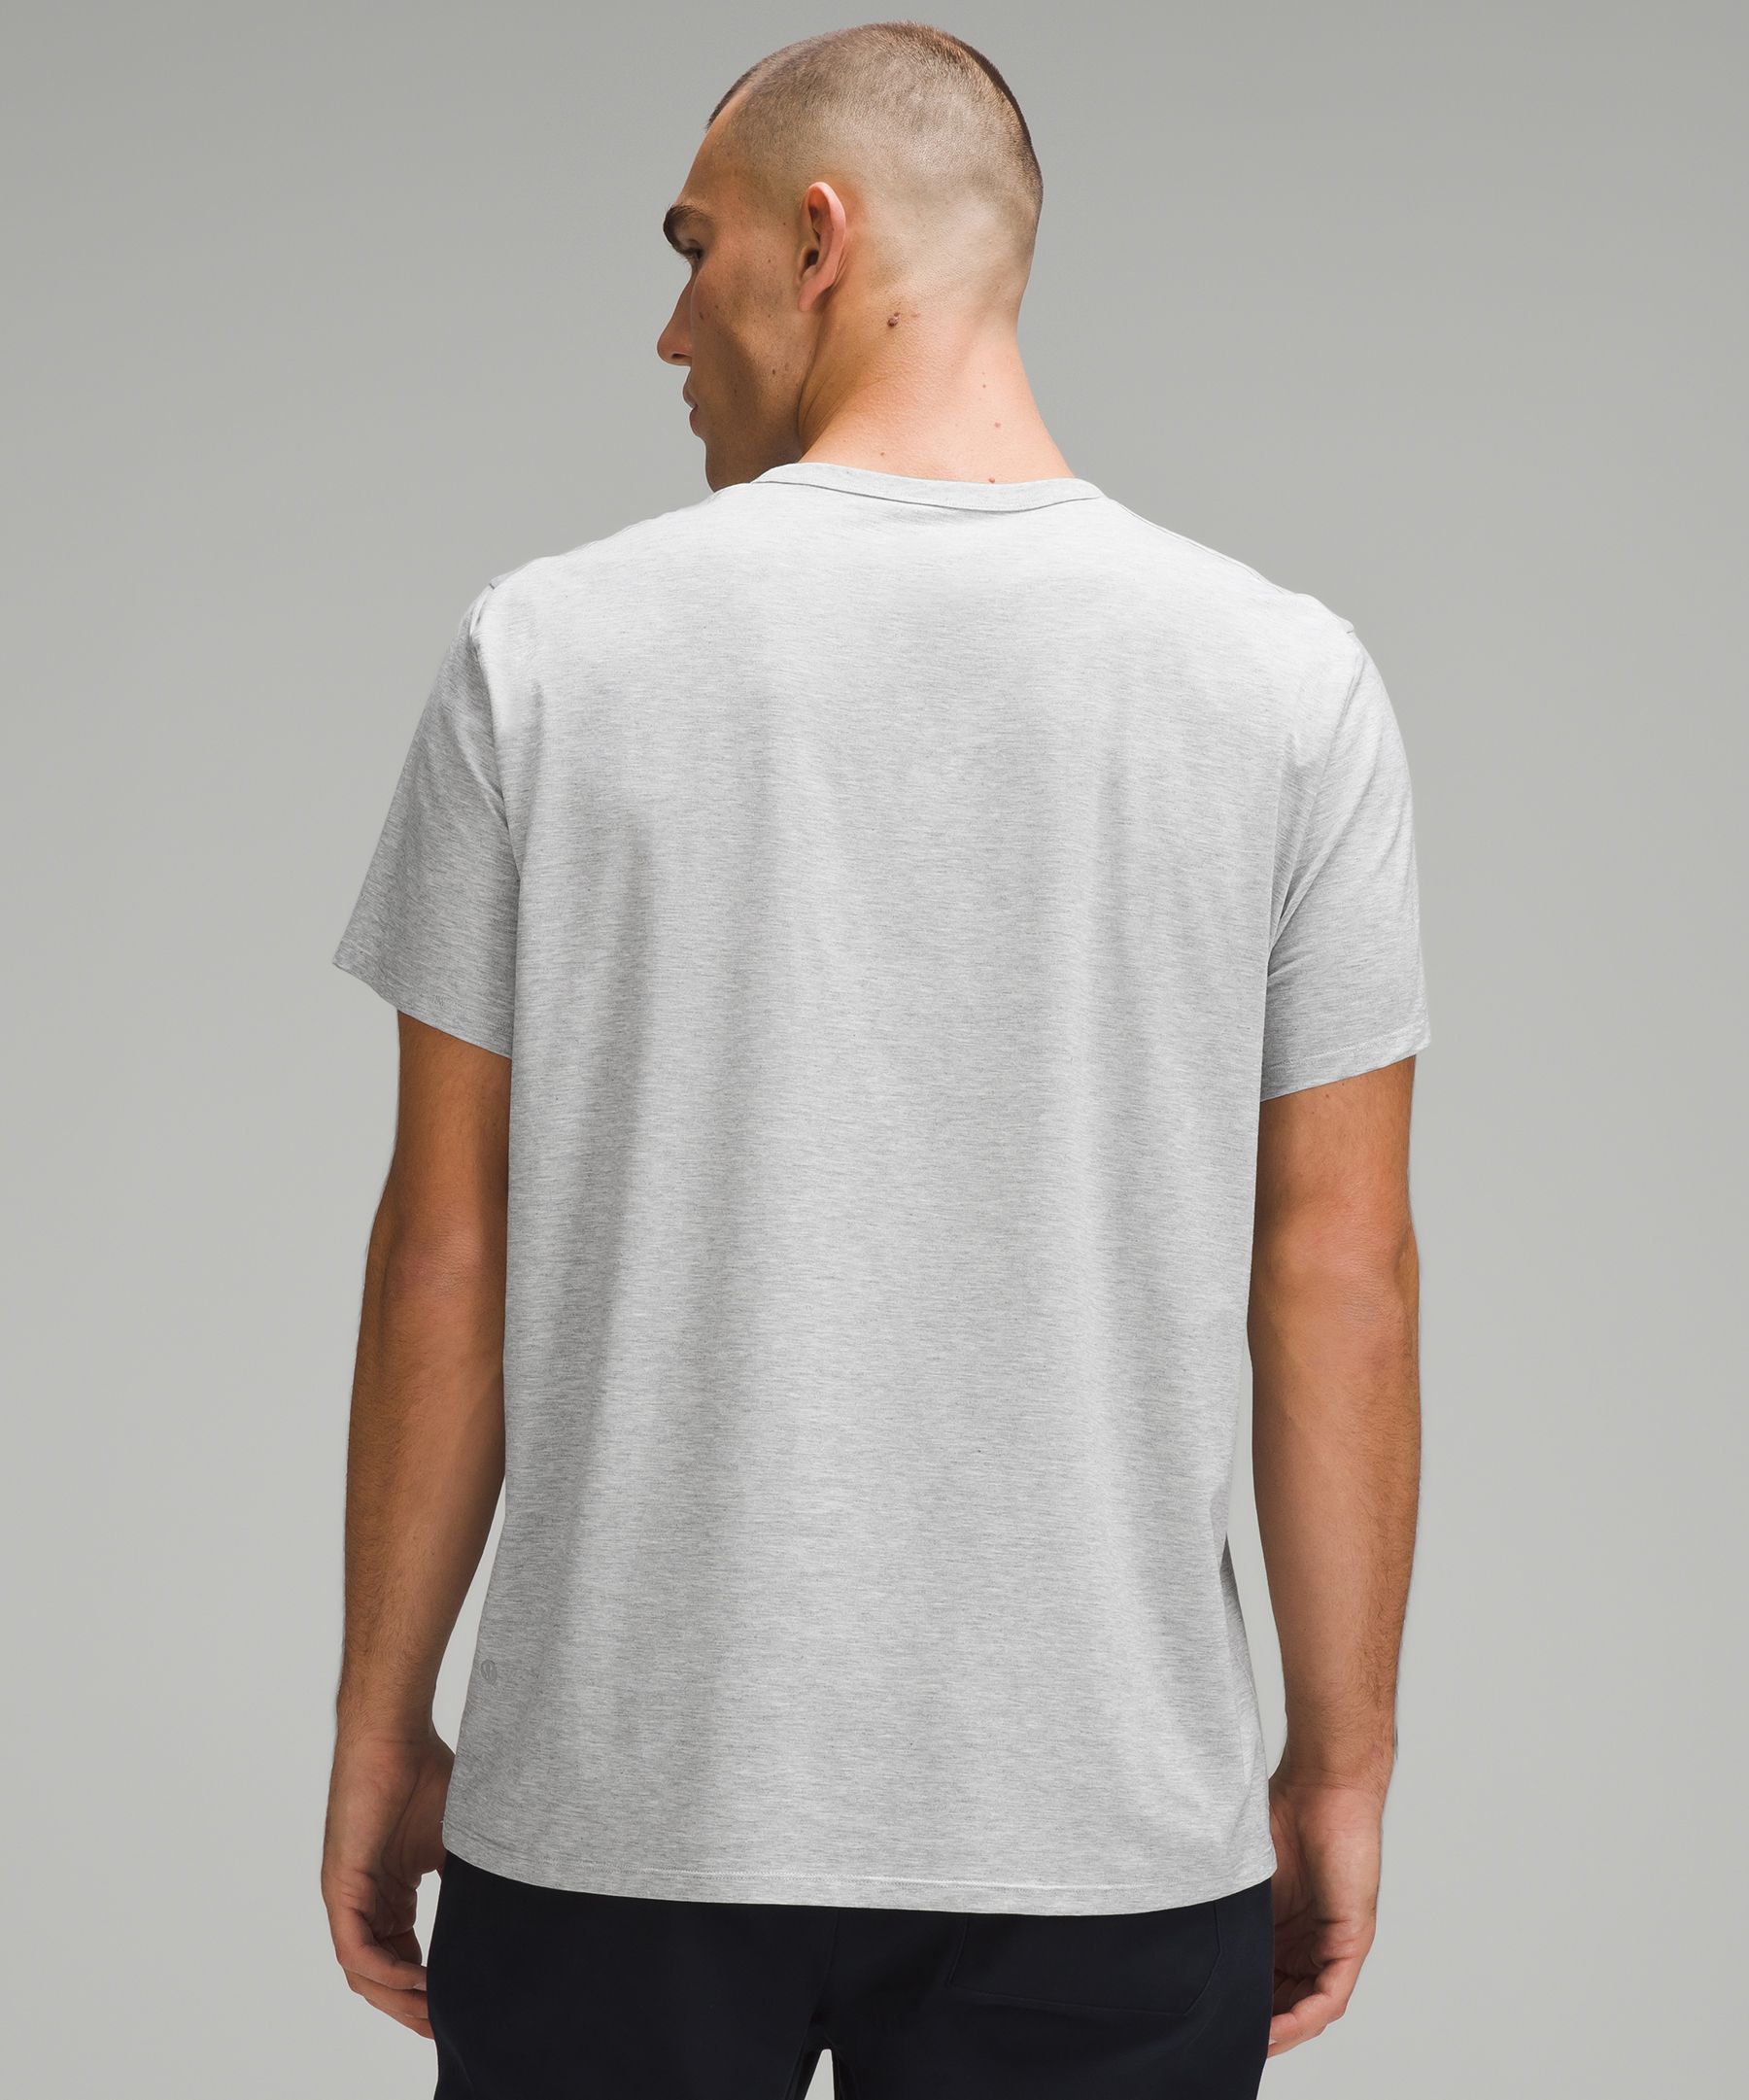 New with Tag* Lululemon Fundamental T-Shirt - Men's L - clothing